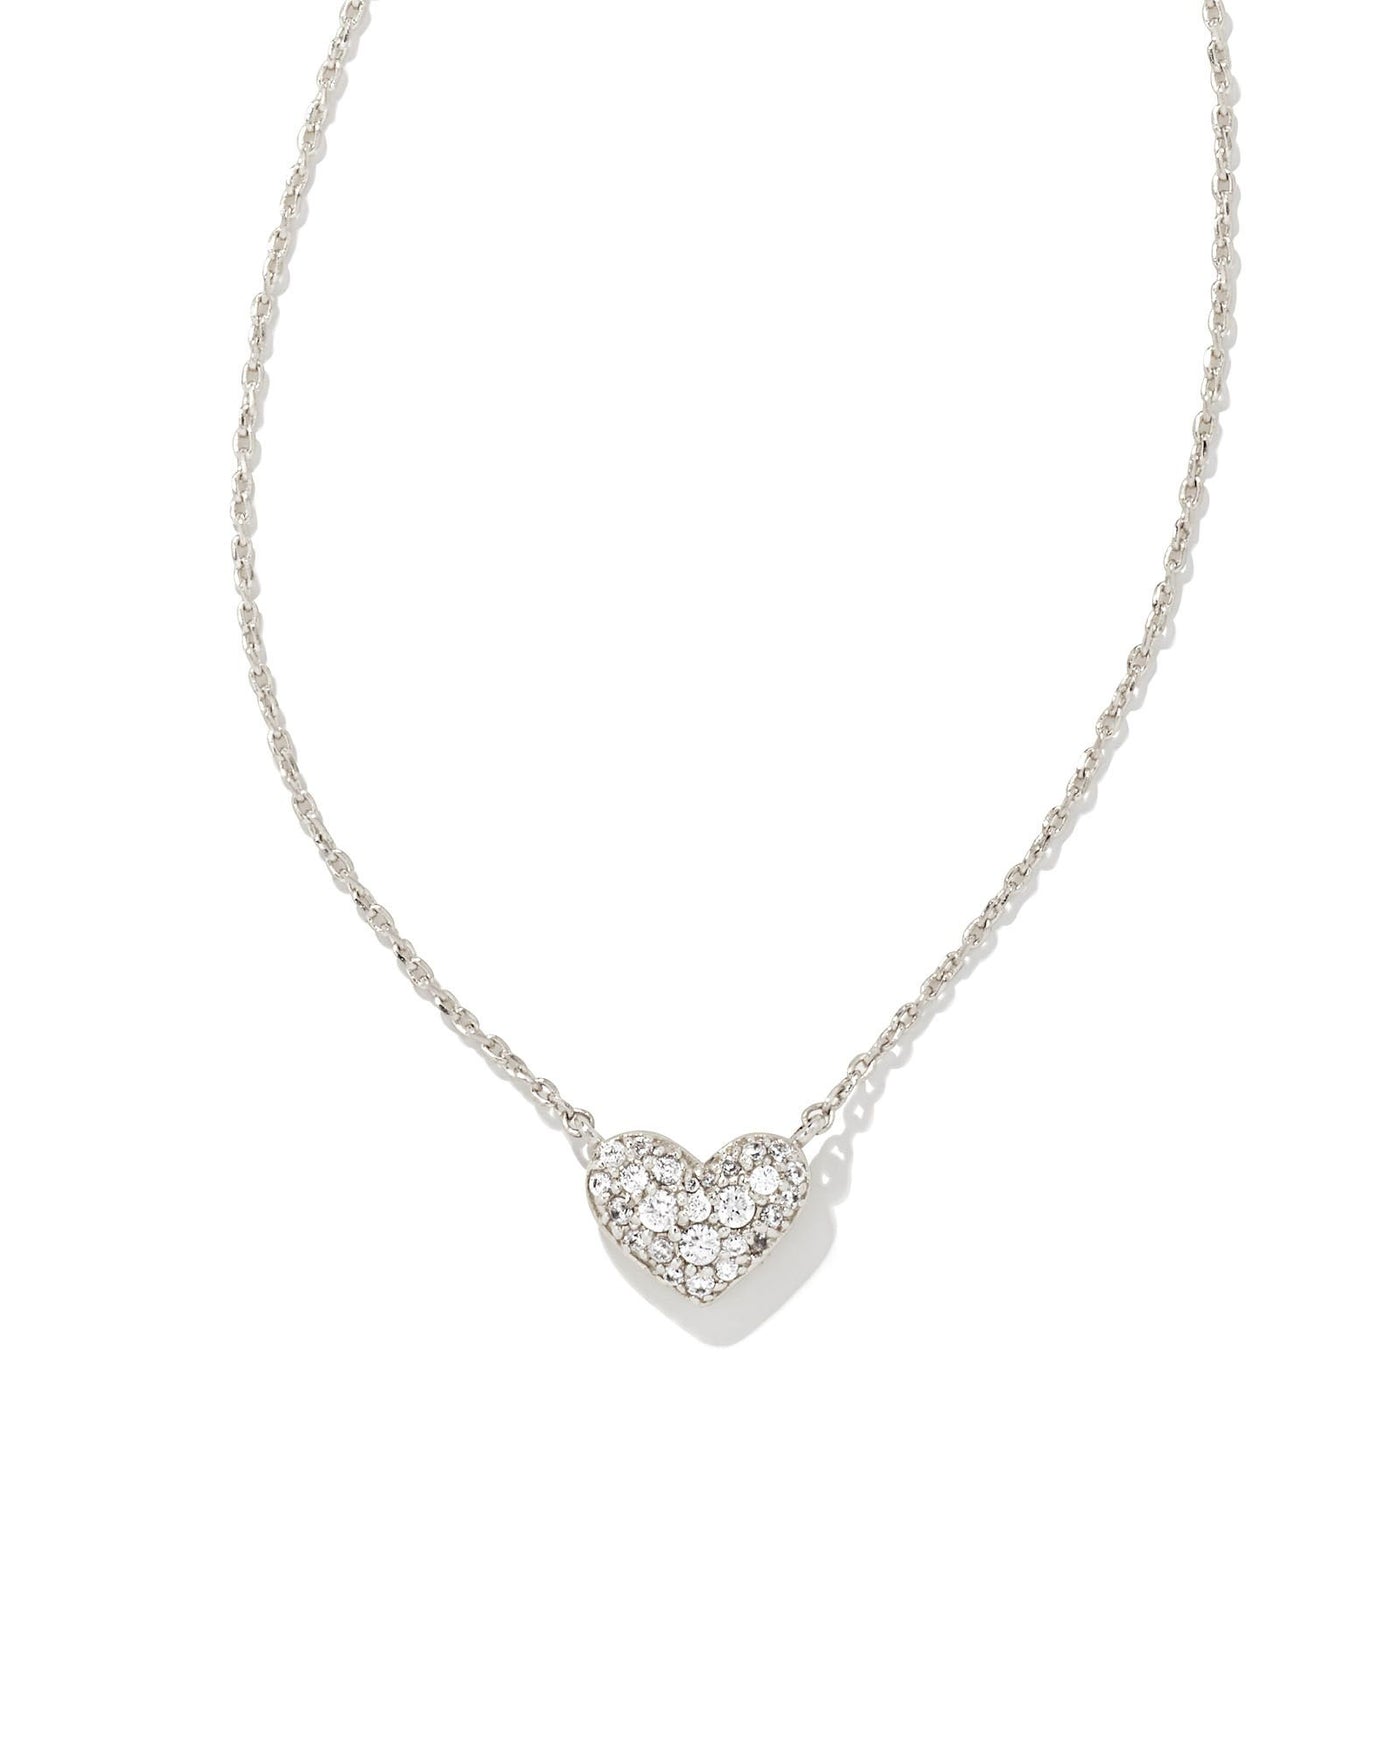 Kendra Scott Ari Pave Crystal Heart Necklace-Necklaces-Kendra Scott-Market Street Nest, Fashionable Clothing, Shoes and Home Décor Located in Mabank, TX